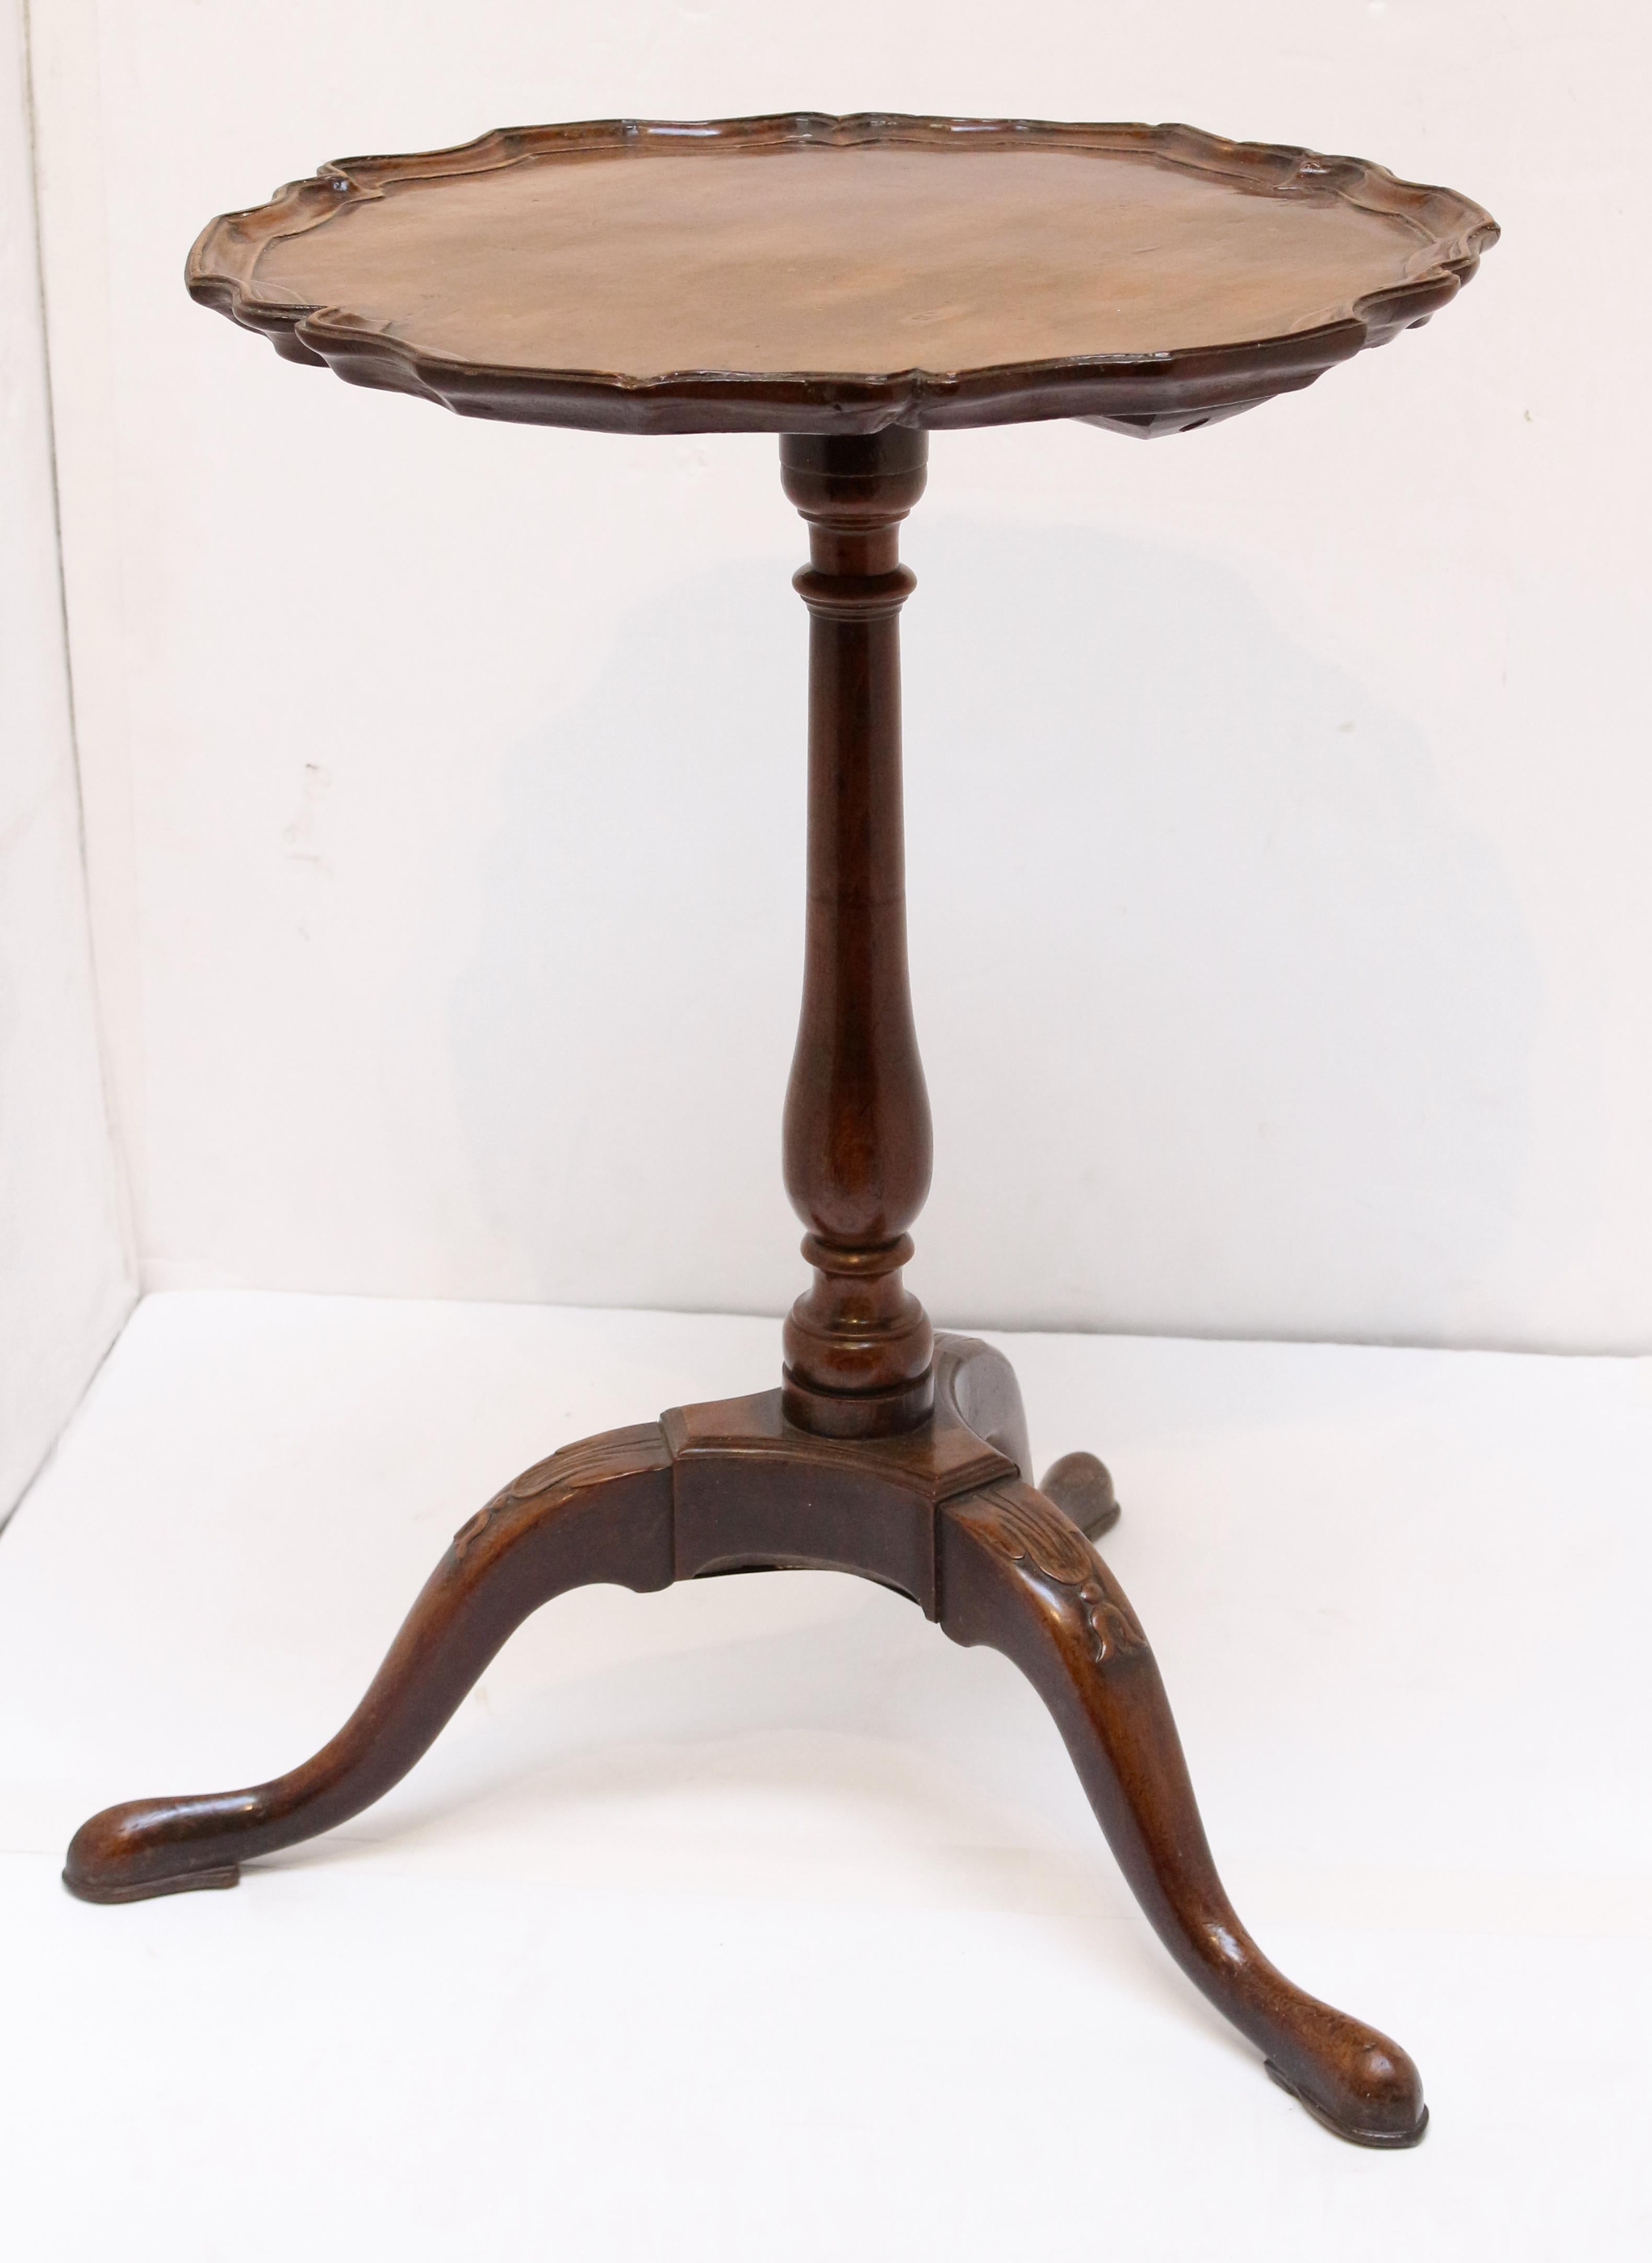 Circa 1760 George III period candlestand table, English. Mahogany. Well shaped and desirable piecrust top. Delicately turned vasi-form shaft with ring carved accents. Tripod base with leaf & bellflower carving at the knees gracefully sloping down to